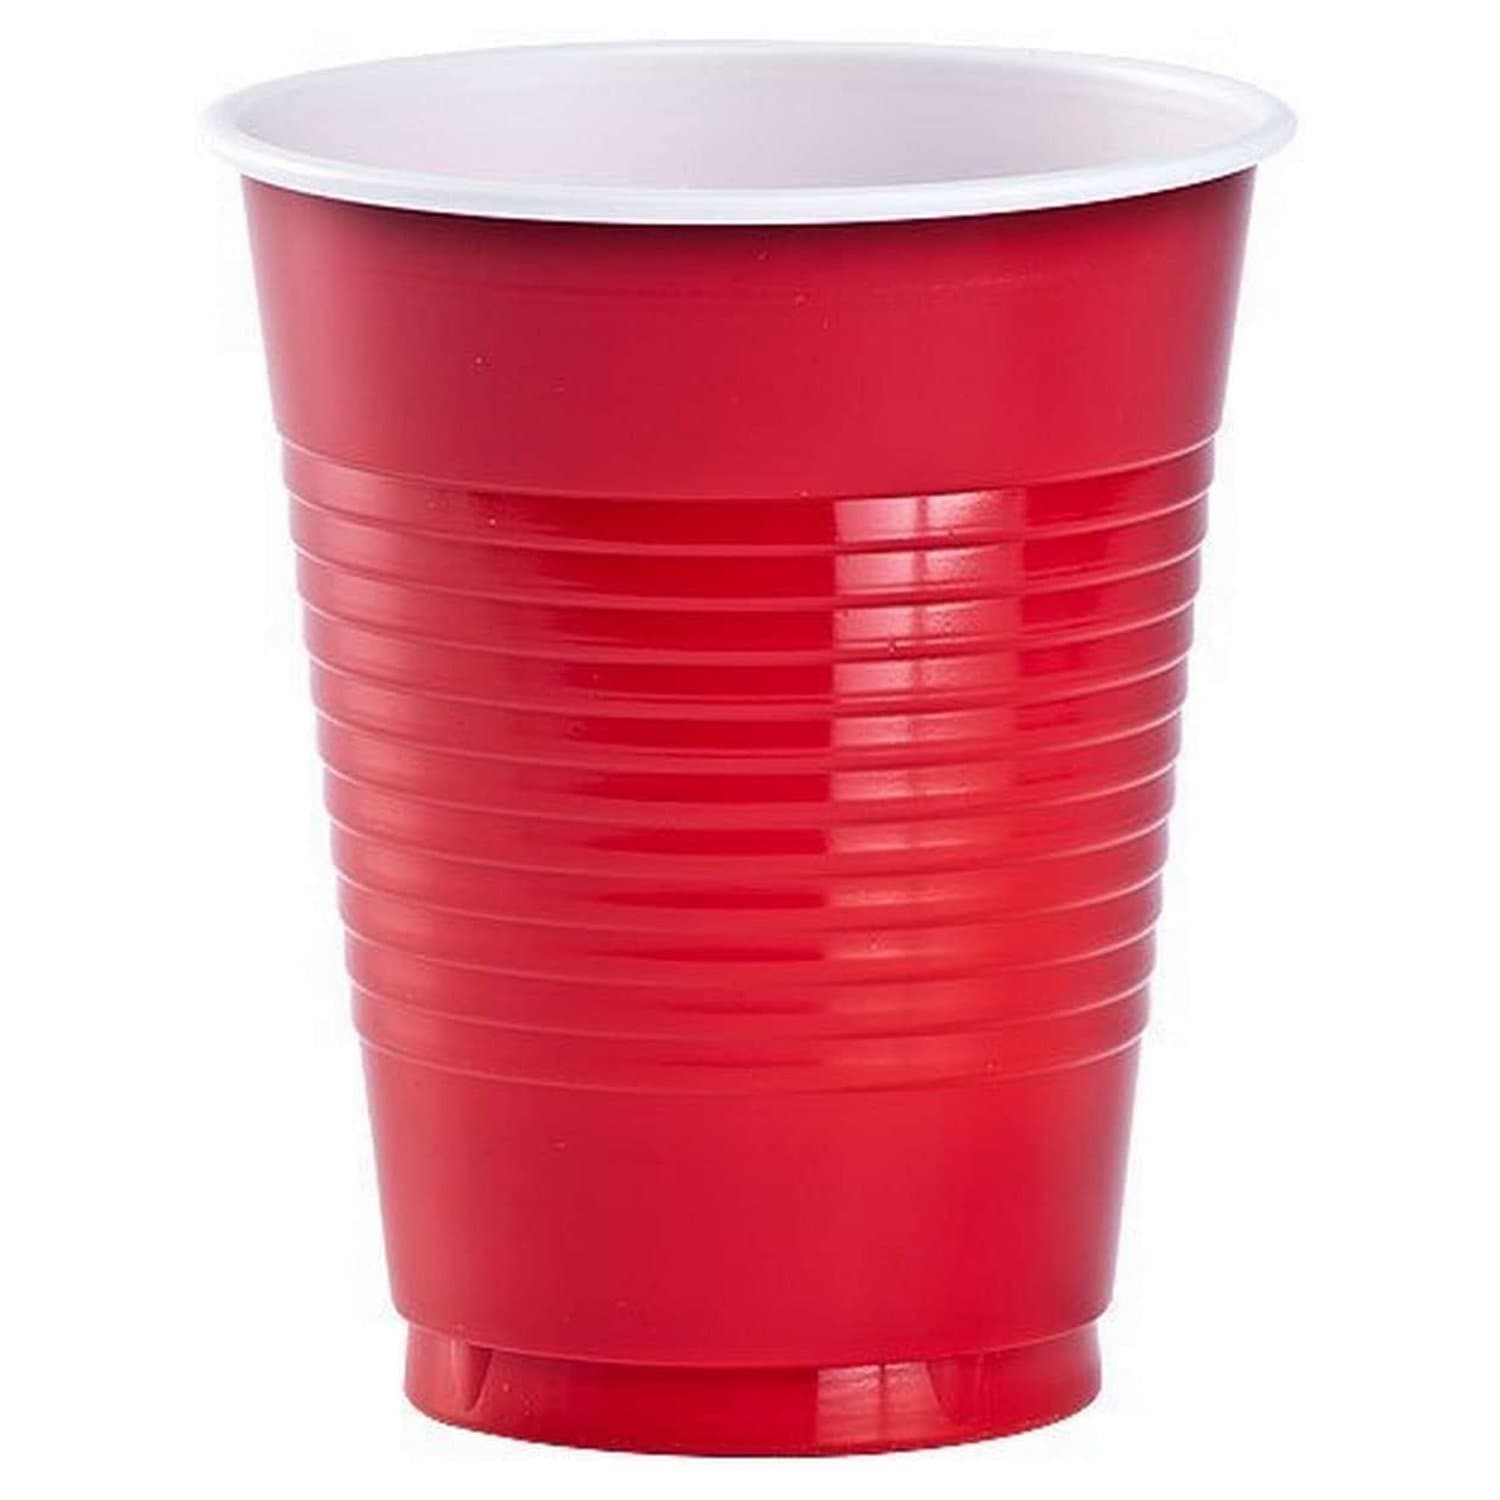 Save on Solo Red Squared Plastic Cups 18 oz Order Online Delivery